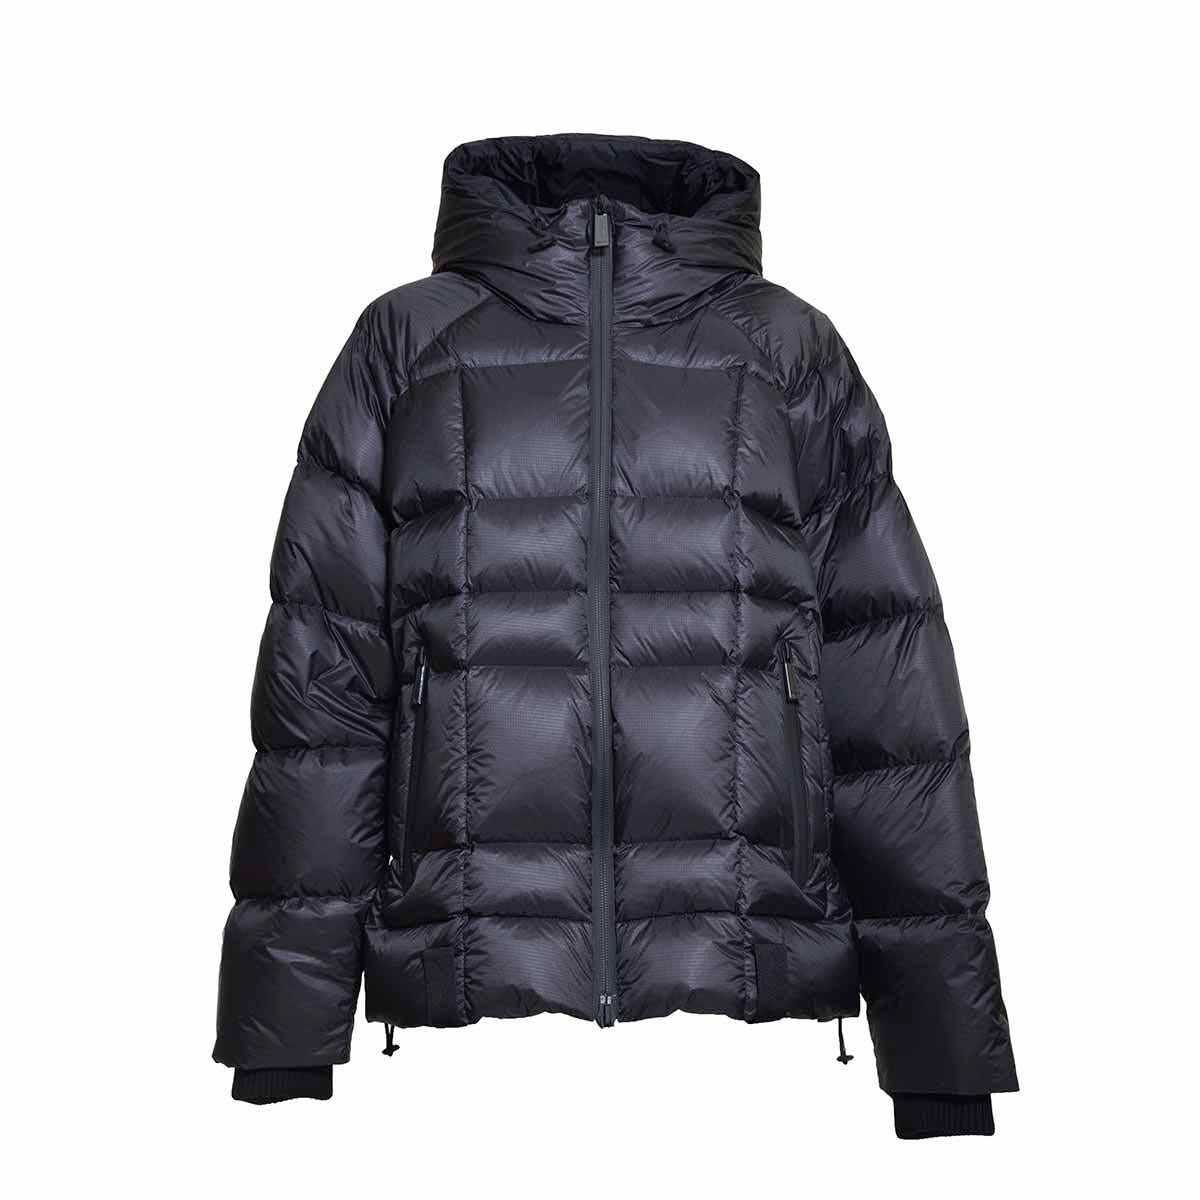 DSQUARED2 DSQUARED2 Black Puff Kaban short down jacket with hood and back logo Dsquared2 Black